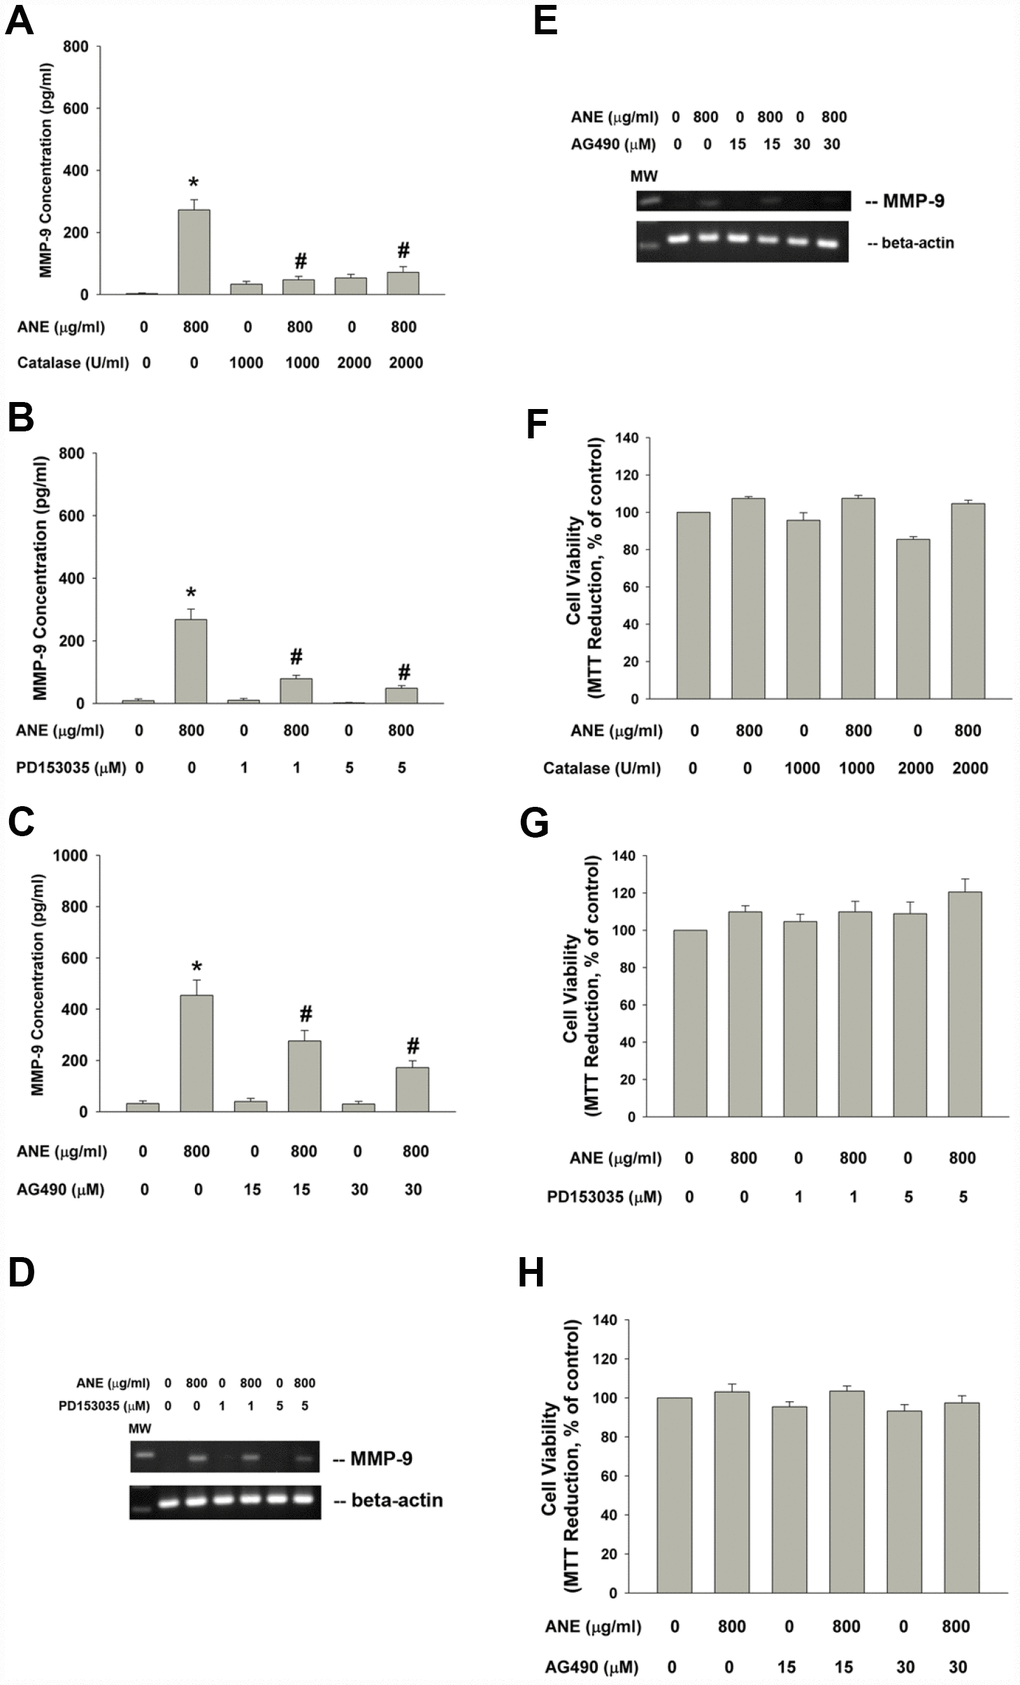 Effect of catalase, PD153035 and AG490 on ANE-induced MMP-9 expression/secretion of SAS cells. Effect of (A) catalase (1000 and 2000 U/ml), (B) PD153035 (1 and 5 μM) and (C) AG490 (15 and 30 μM) on ANE (800 μg/ml)-induced MMP-9 secretion in SAS oral cancer epithelial cells. Results were expressed as Mean ± SE (pg/ml). (D) Effect of PD153035 and (E) Effect of AG490 on ANE (800 μg/ml)-induced MMP-9 mRNA expression, Effect of (F) catalase, (G) PD153035 and (H) AG490 on ANE (800 μg/ml)-induced changes of cell viability of SAS oral cancer epithelial cells. (Mean ± SE, % of control). *denotes statistically significant difference when compared with control. #denotes statistically significant difference when compared with ANE-treated group.